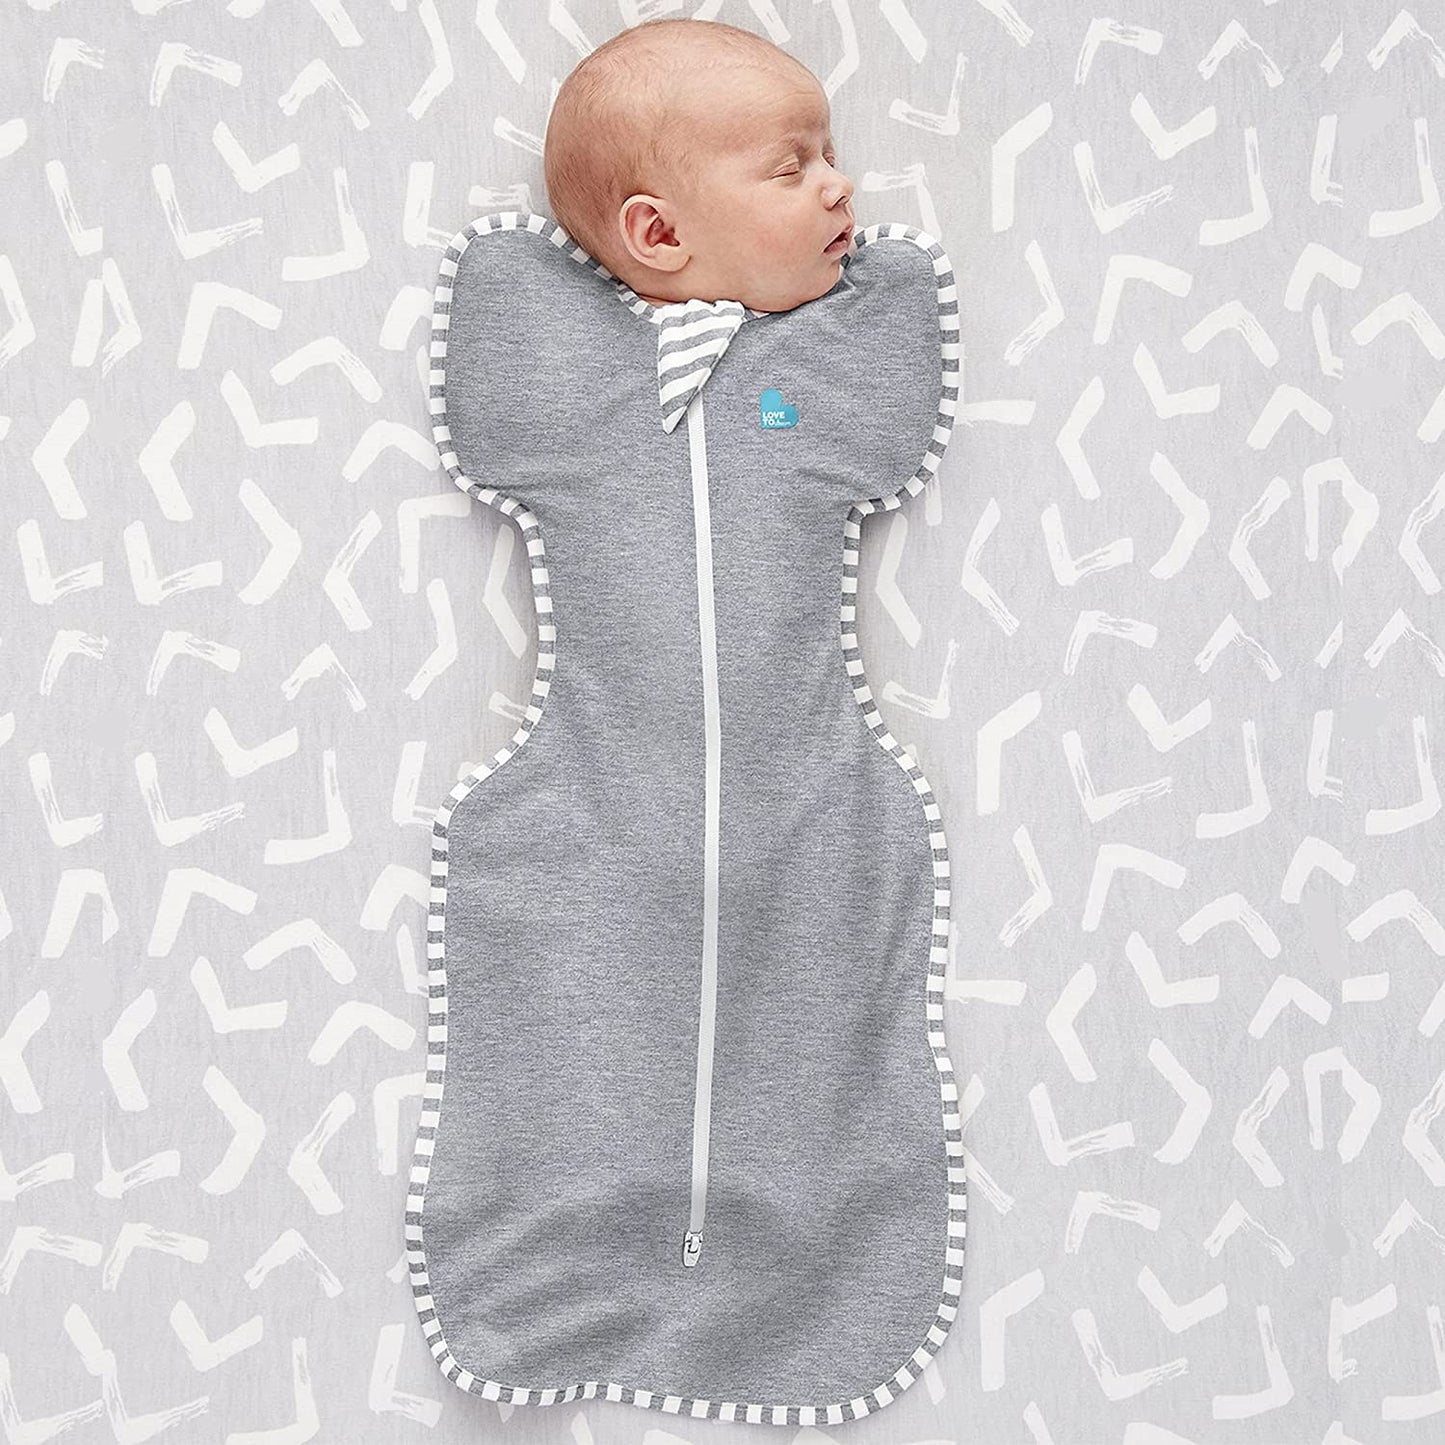 Love to Dream Swaddle UP, Baby Sleep Sack, Self-Soothing Swaddles for Newborns, Improves Sleep, Snug Fit Helps Calm Startle Reflex, New Born Essentials for Baby, 13-19 lbs, Gray